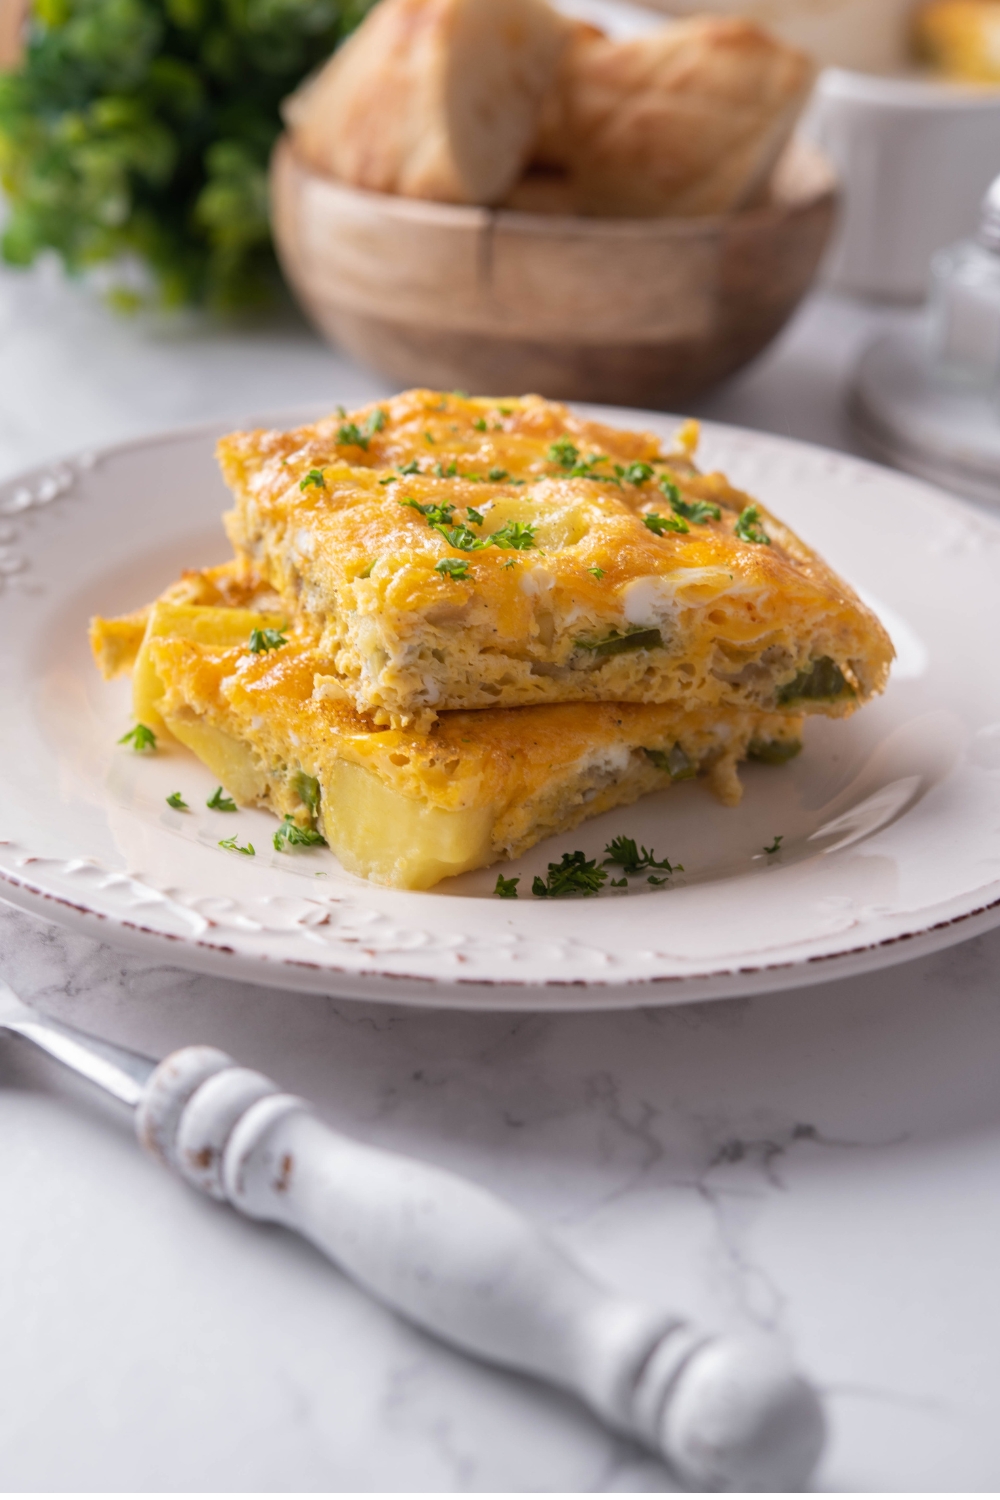 A plate with two slices of breakfast potato casserole garnished with fresh herbs.